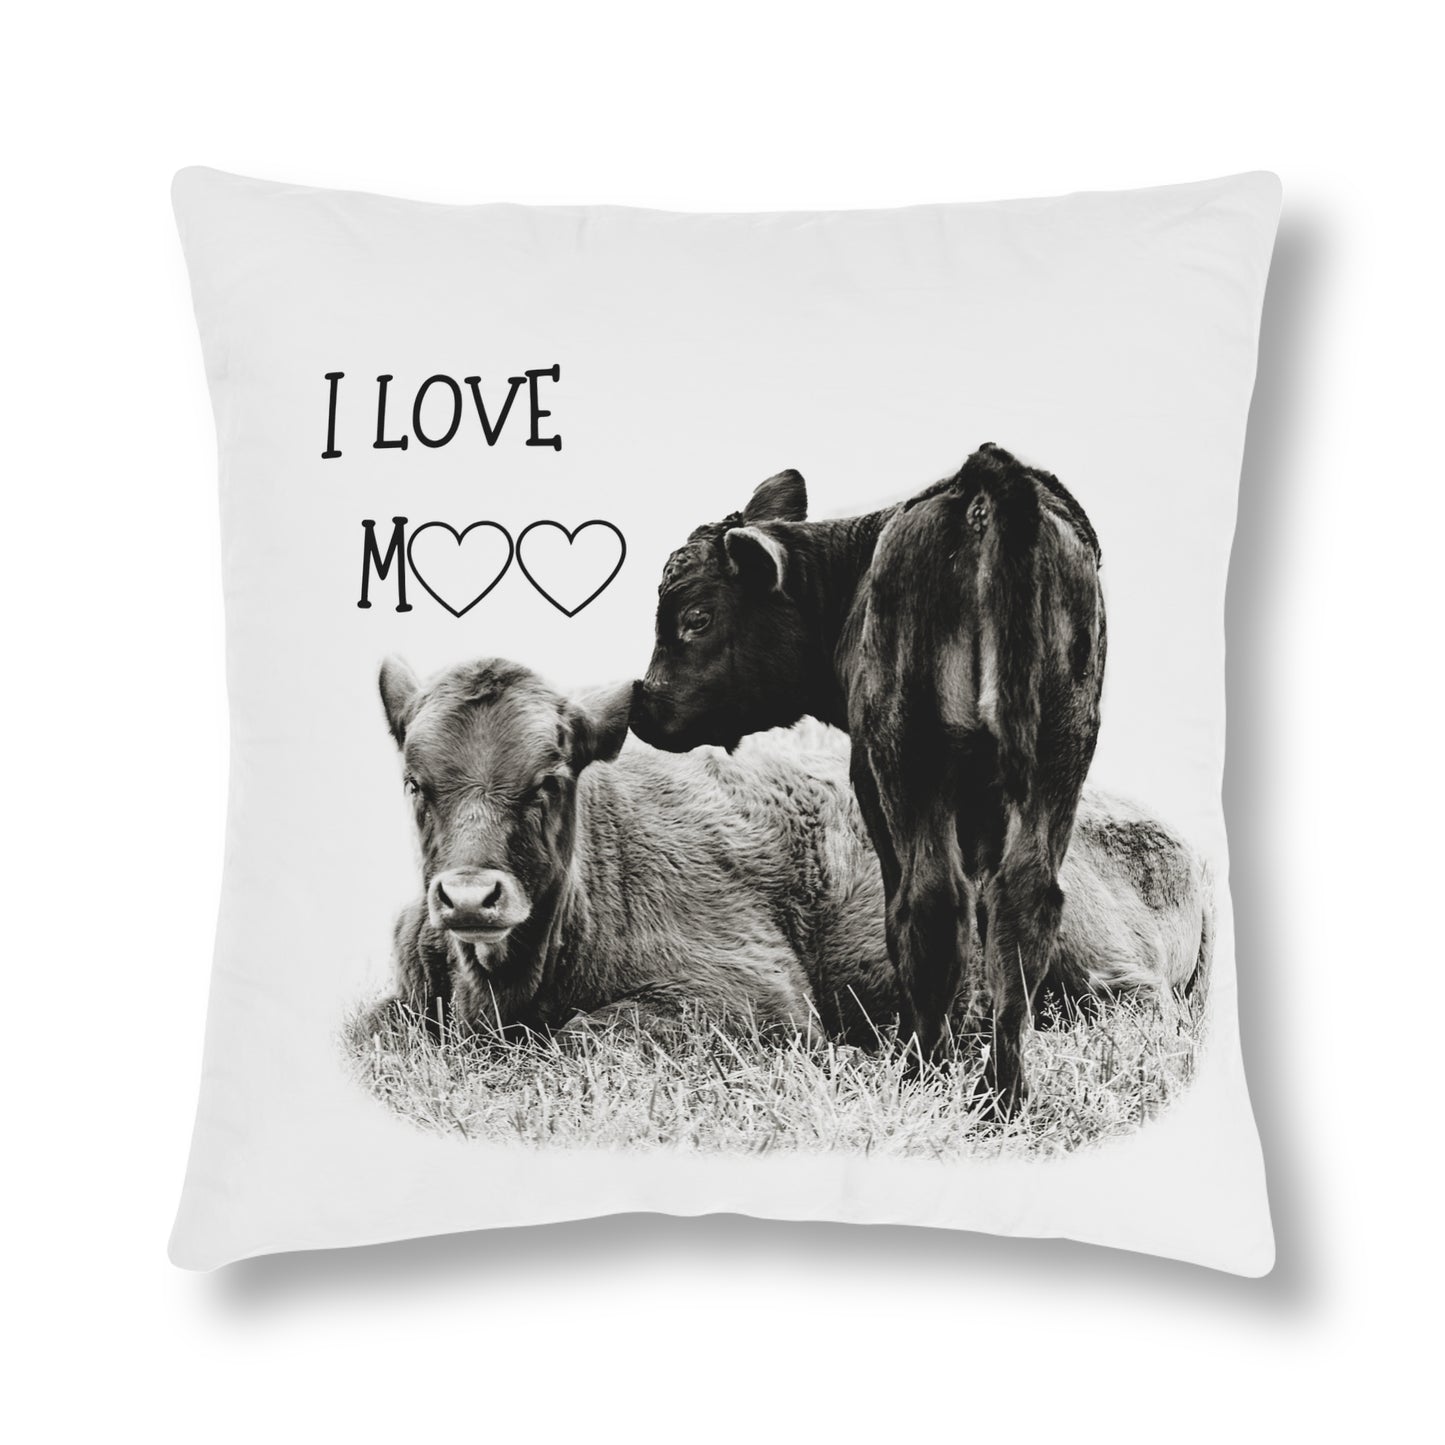 Baby Cow Cuddling Farmhouse Quote Waterproof Pillows